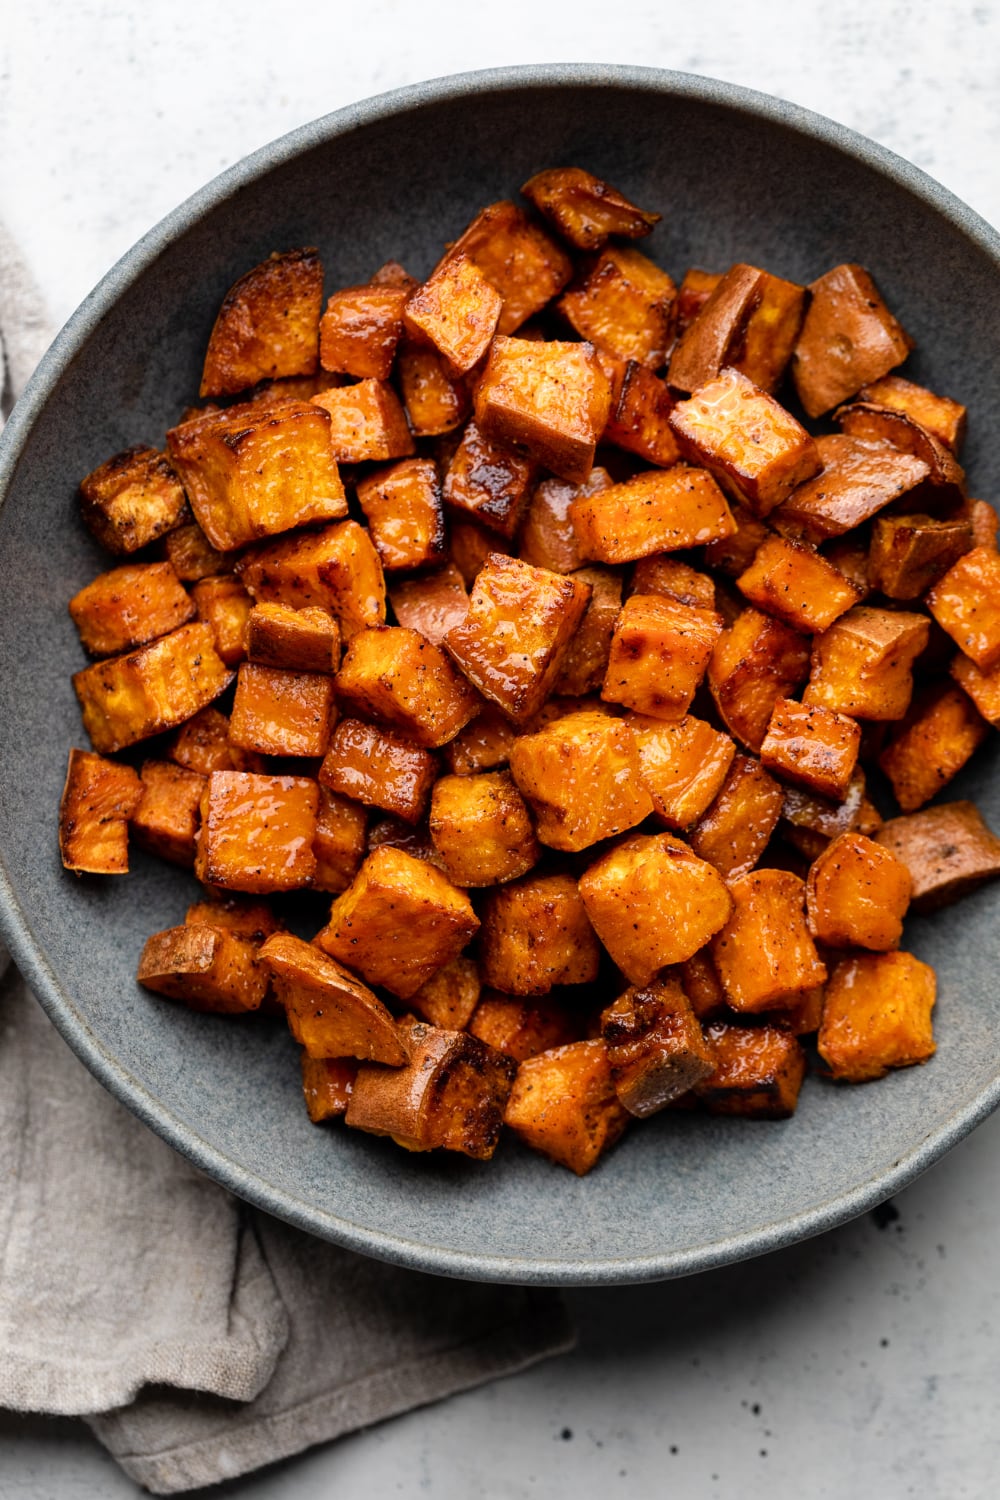 A bowl of sweet potatoes right out of the oven ready to serve.